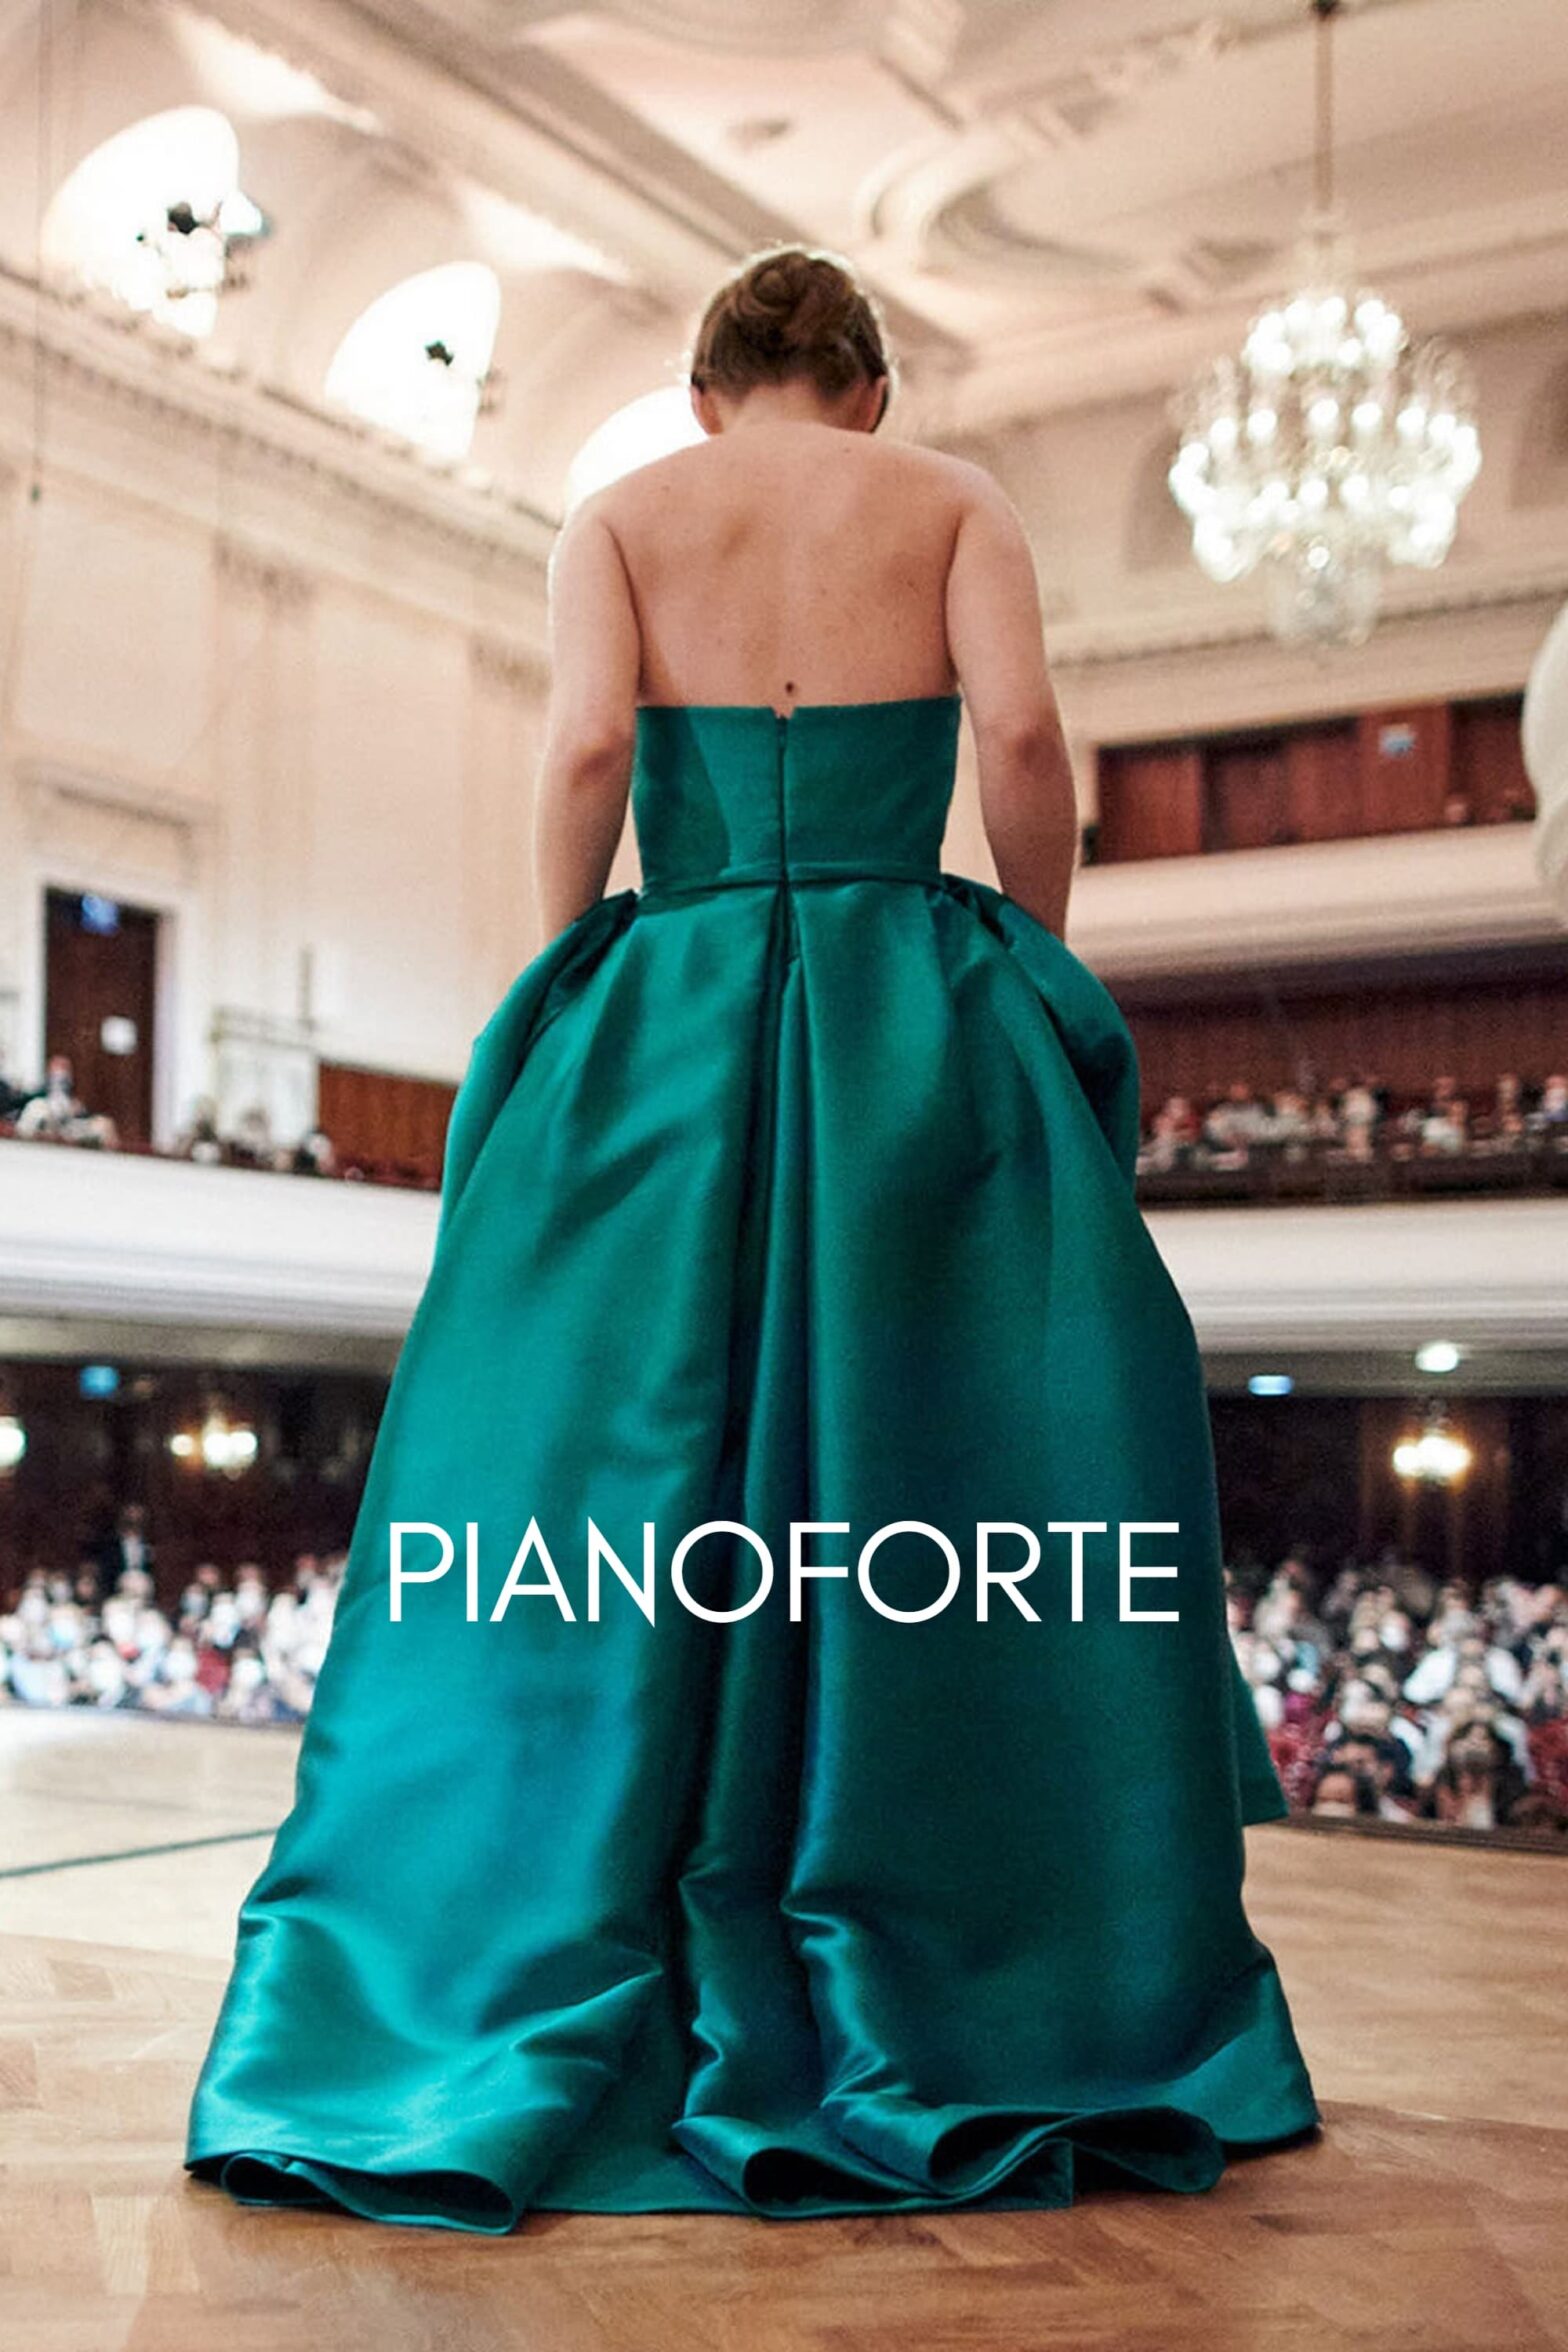 Poster for the movie "Pianoforte"